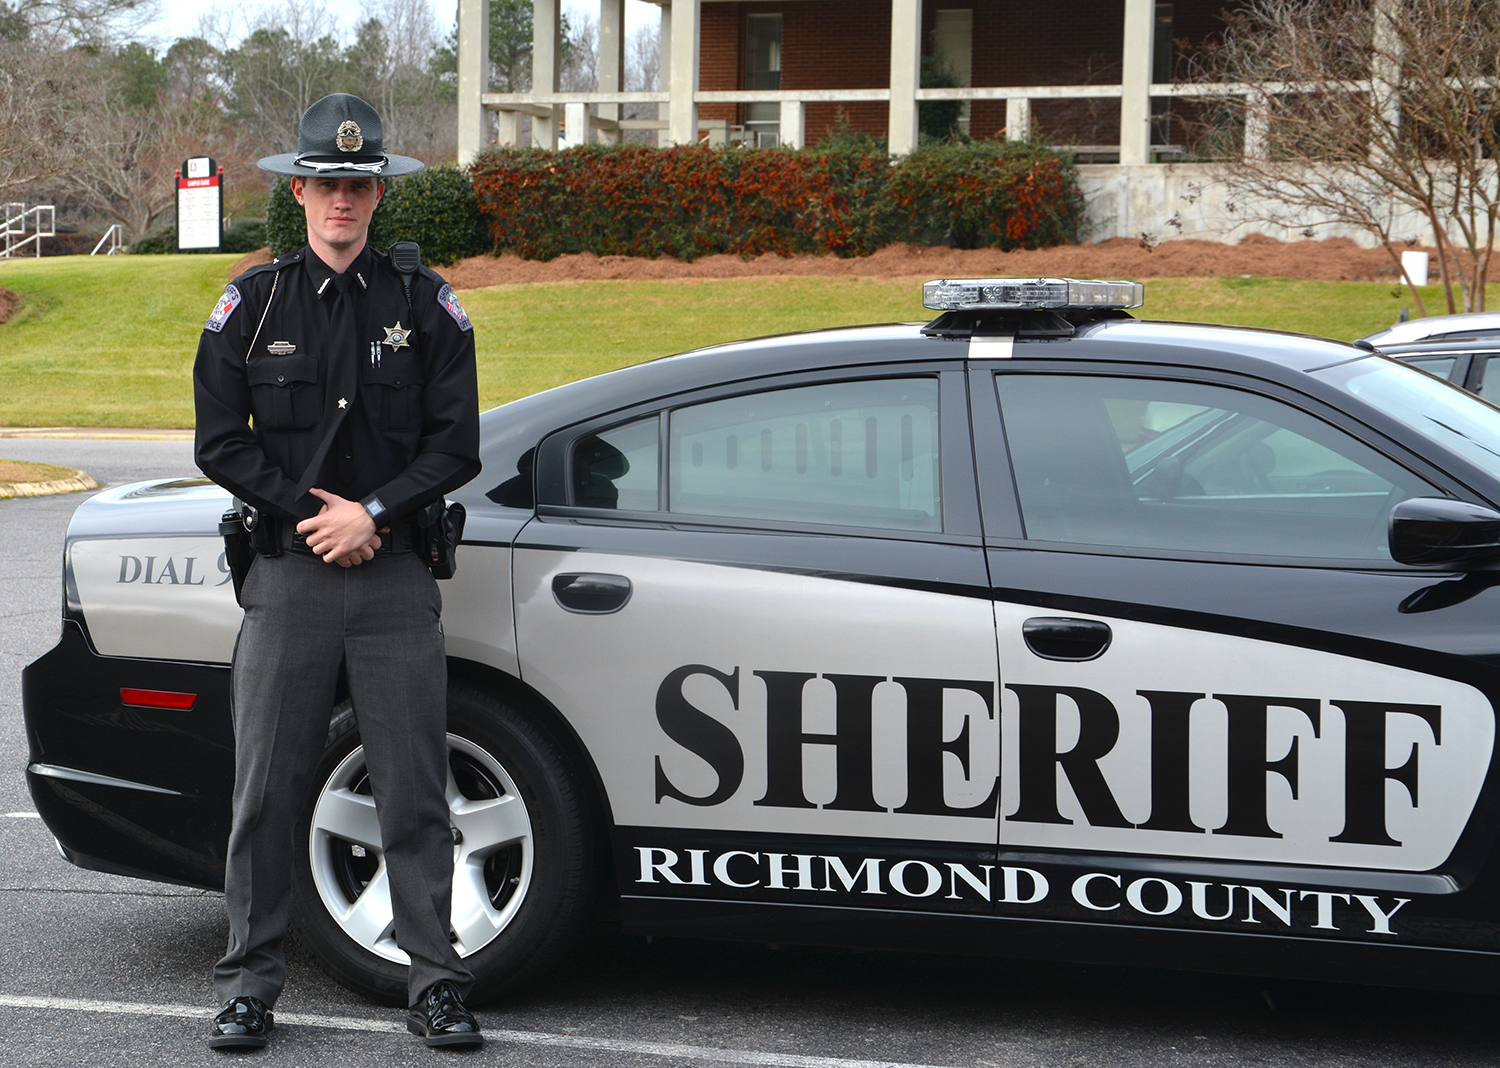 Richmond County Sheriff’s Deputy Thomas Thompson stands next to his patrol car on the campus of Richmond Community College, where he completed the Basic Law Enforcement Training program.